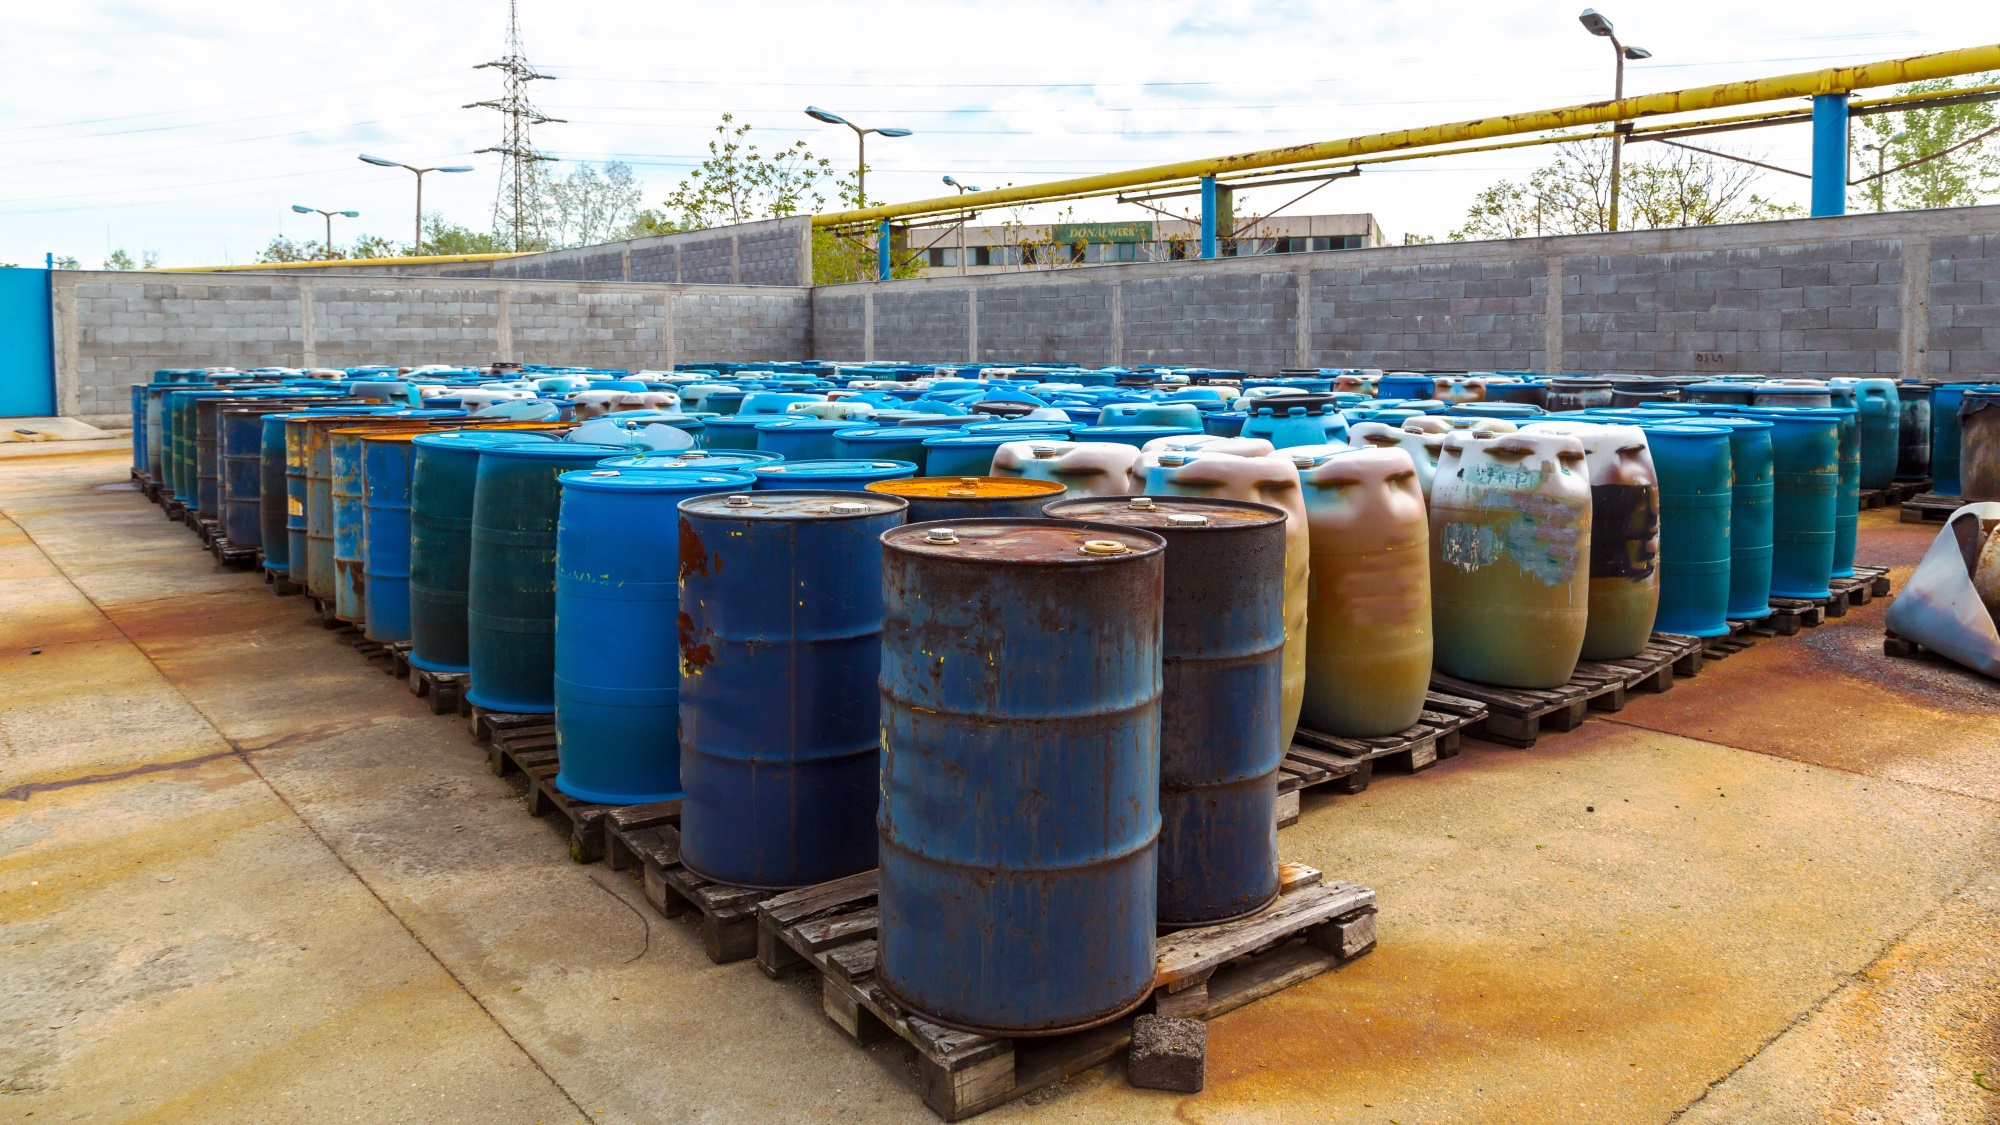 Drums and other containers of hazardous waste being readied for hazardous waste disposal.